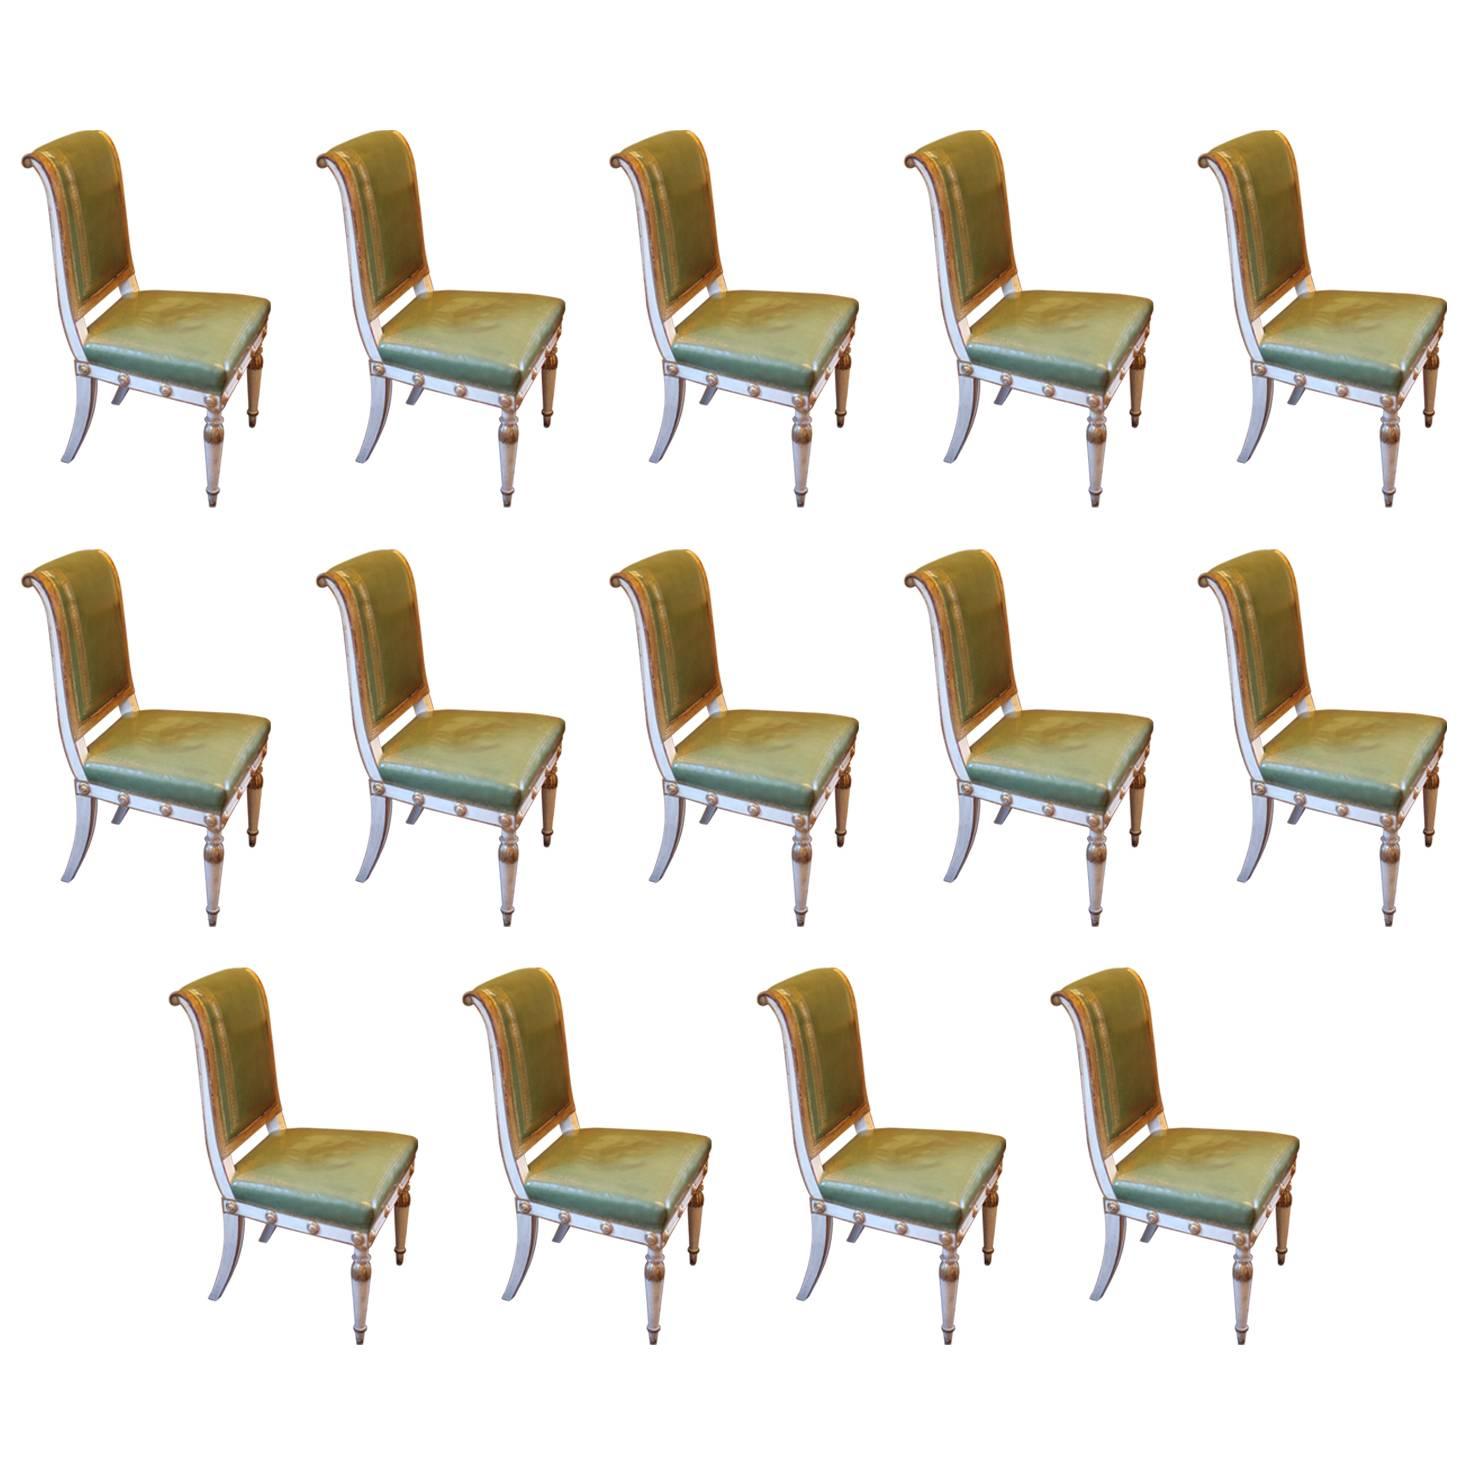 Antique Hollywood Regency Dining Chairs after Jean-Baptiste Boulard White Empire